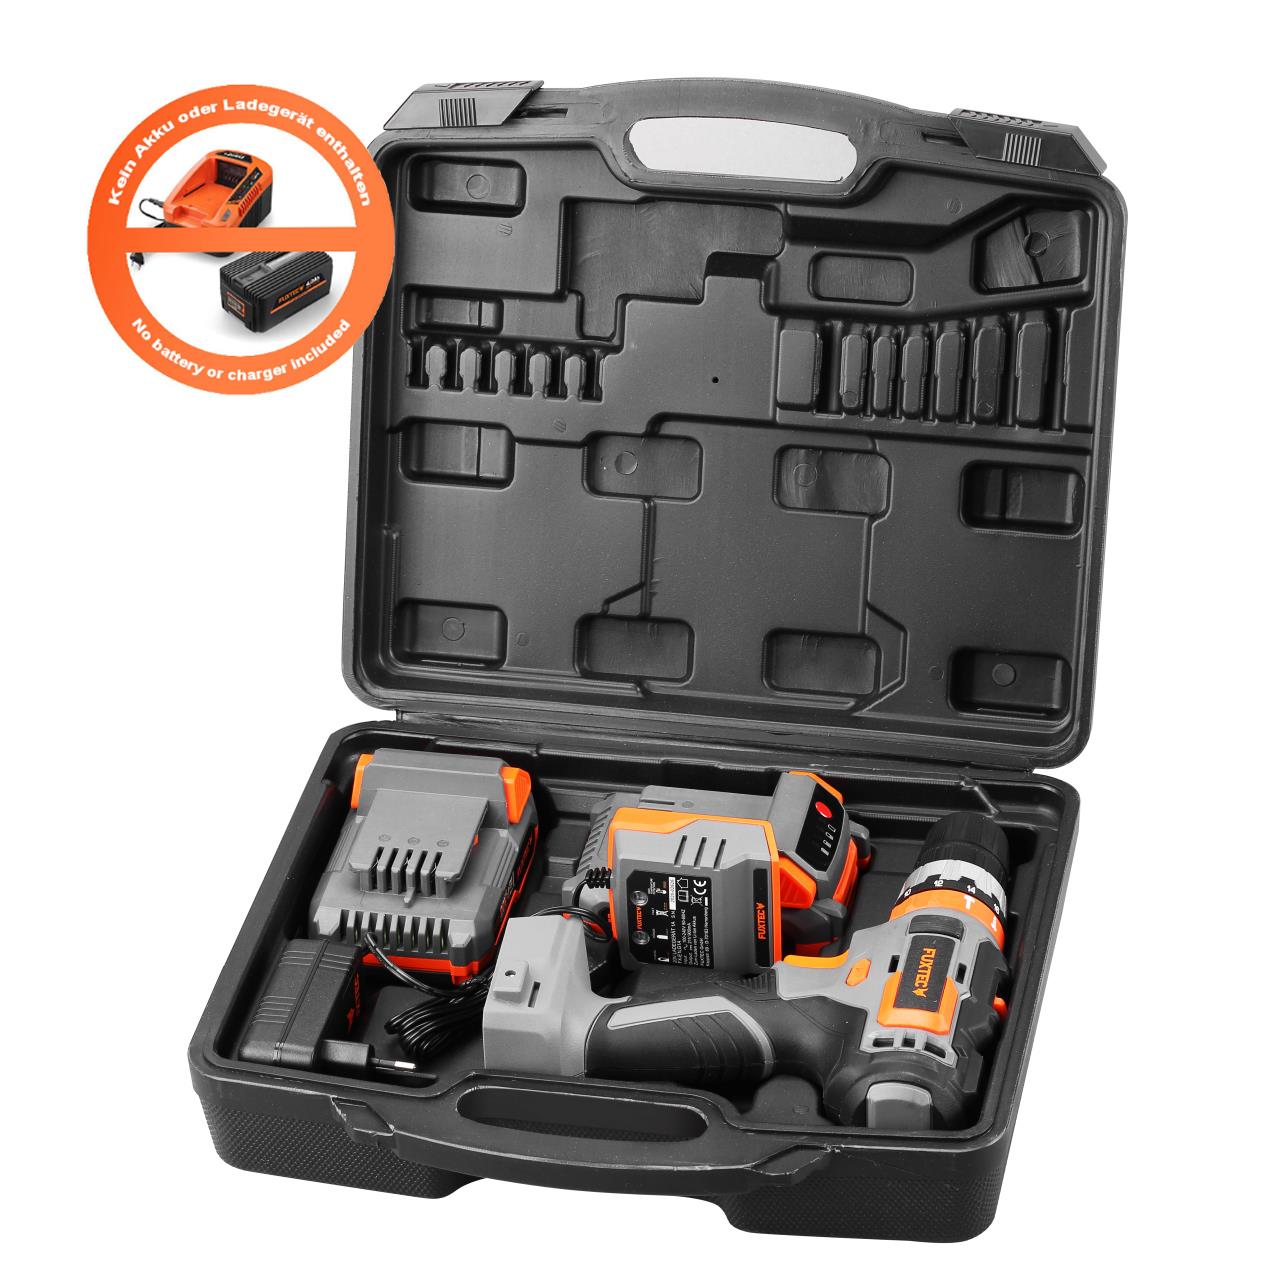 FUXTEC 20V cordless impact drill/driver - solo - E1SBS20 - no battery and charger included!